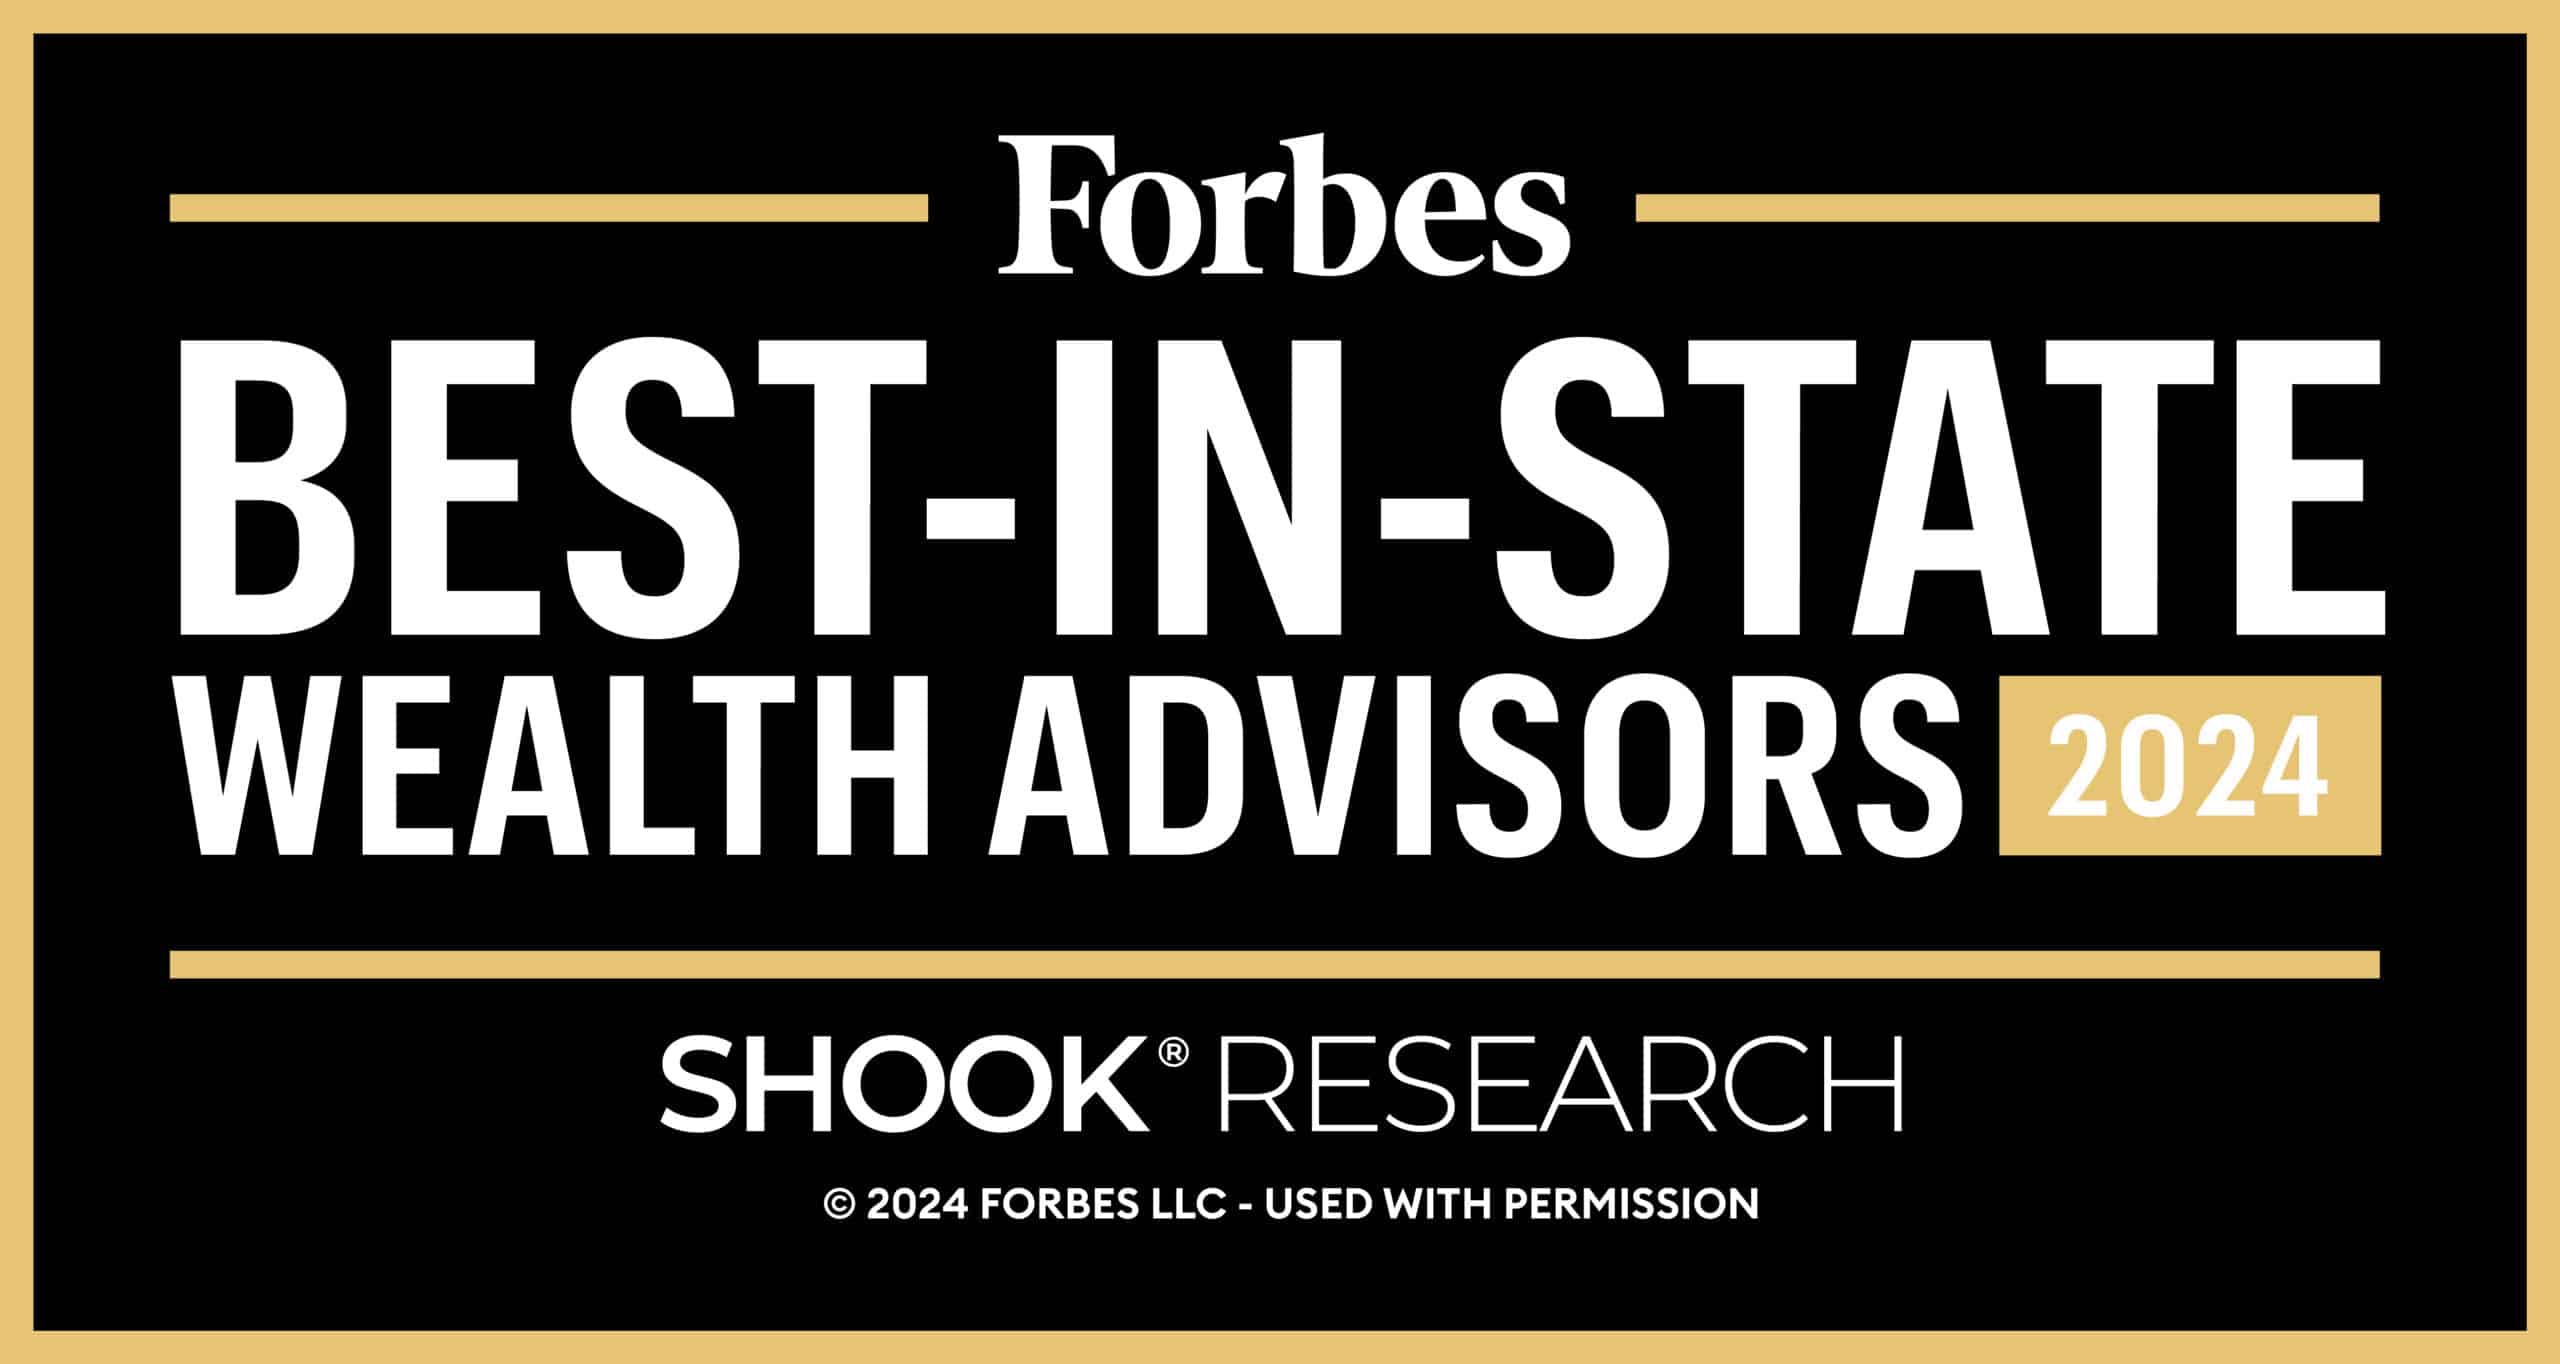 Forbes Best-In-State Wealth Advisor Award Image 2024